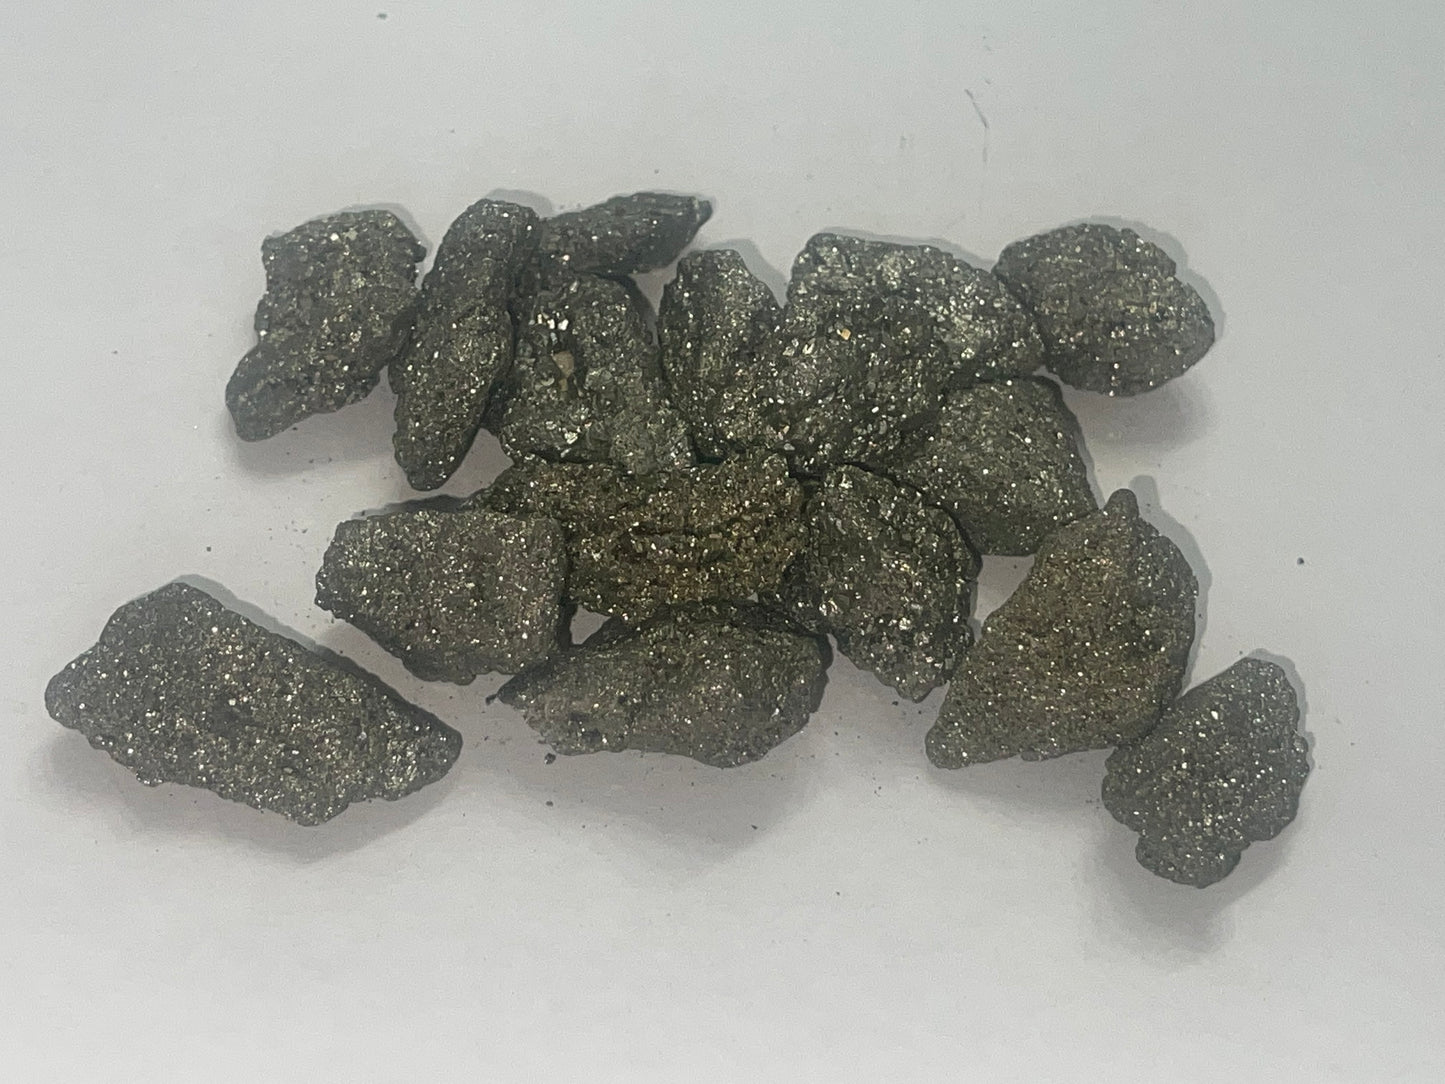 Pyrite Stones (Fools Gold) from Peru